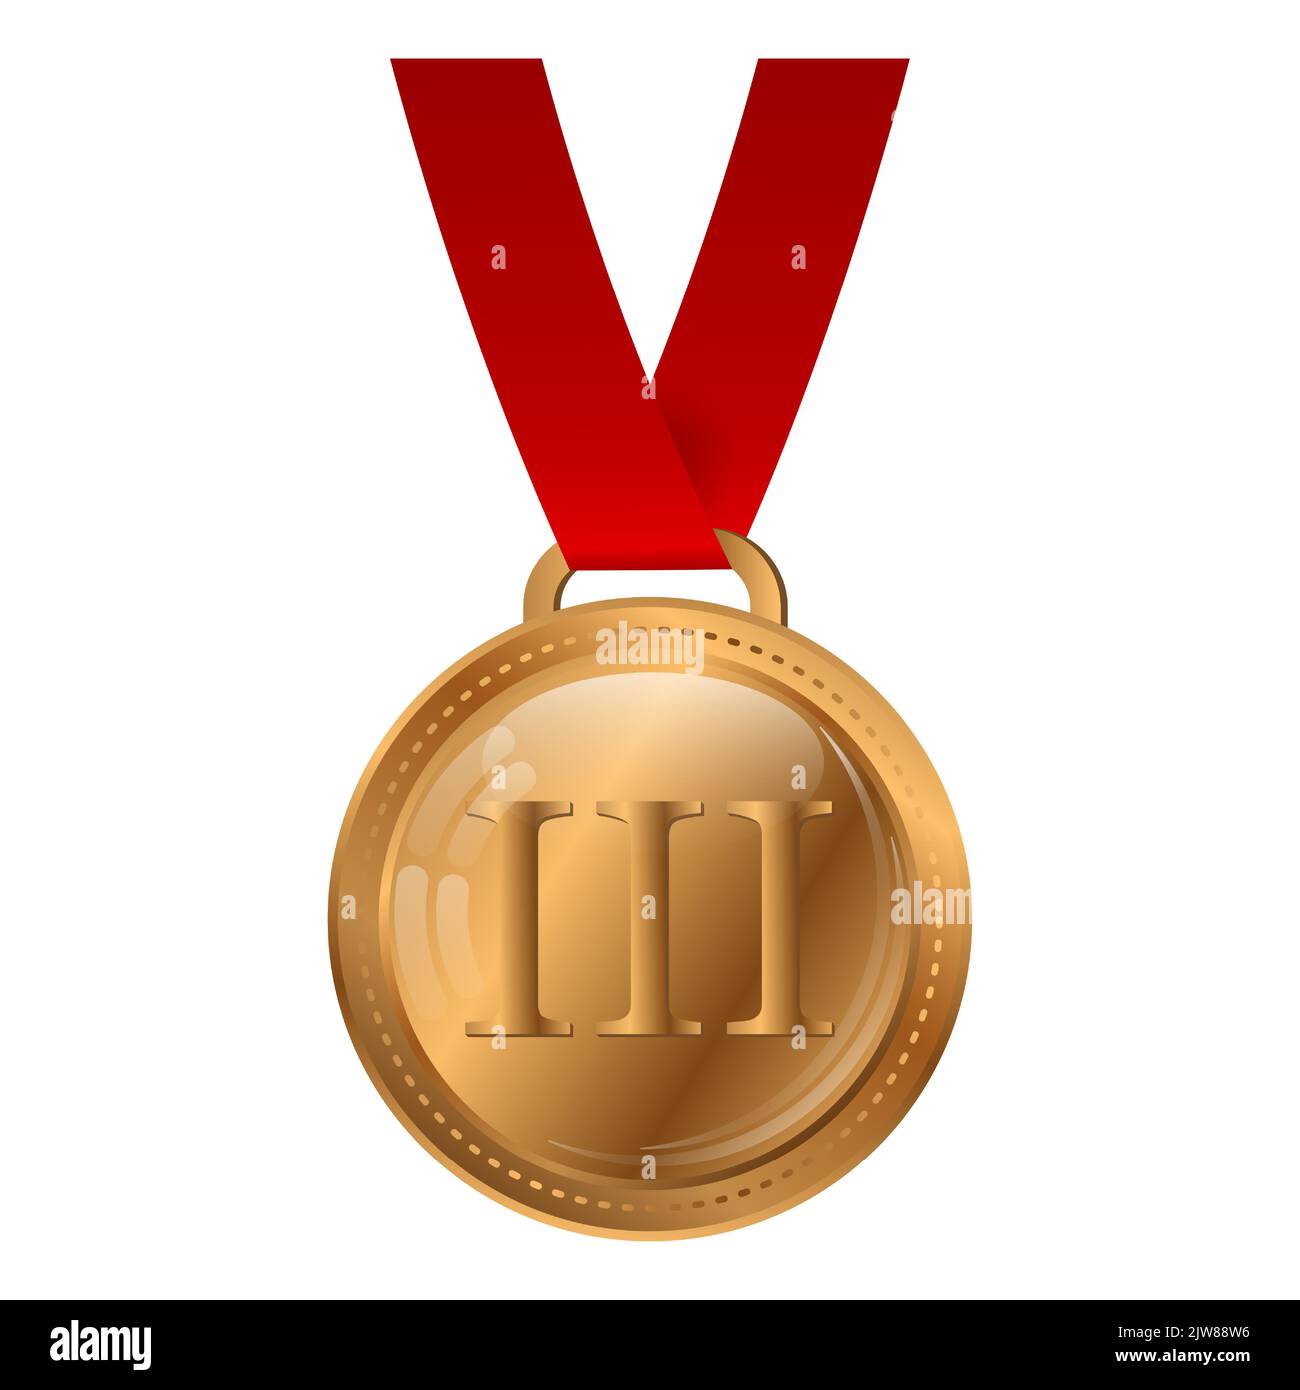 Bronze medal with red ribbon isolated on white background. Award, prize for third place. Vector illustration. Stock Vector